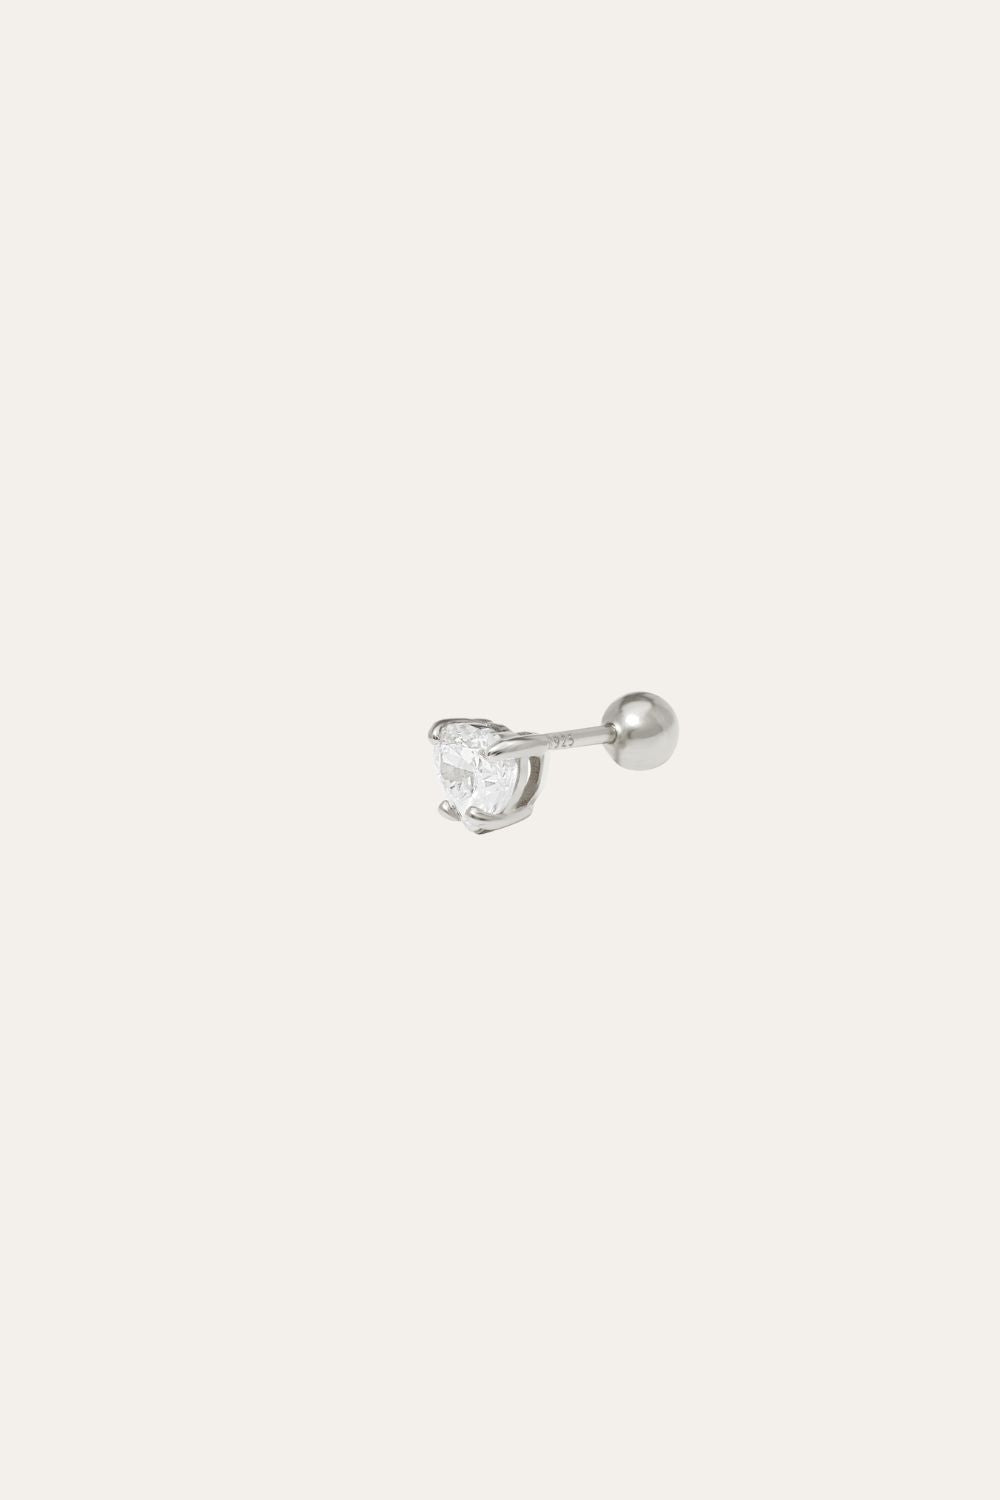 Fiona sterling silver stud (ball screw)